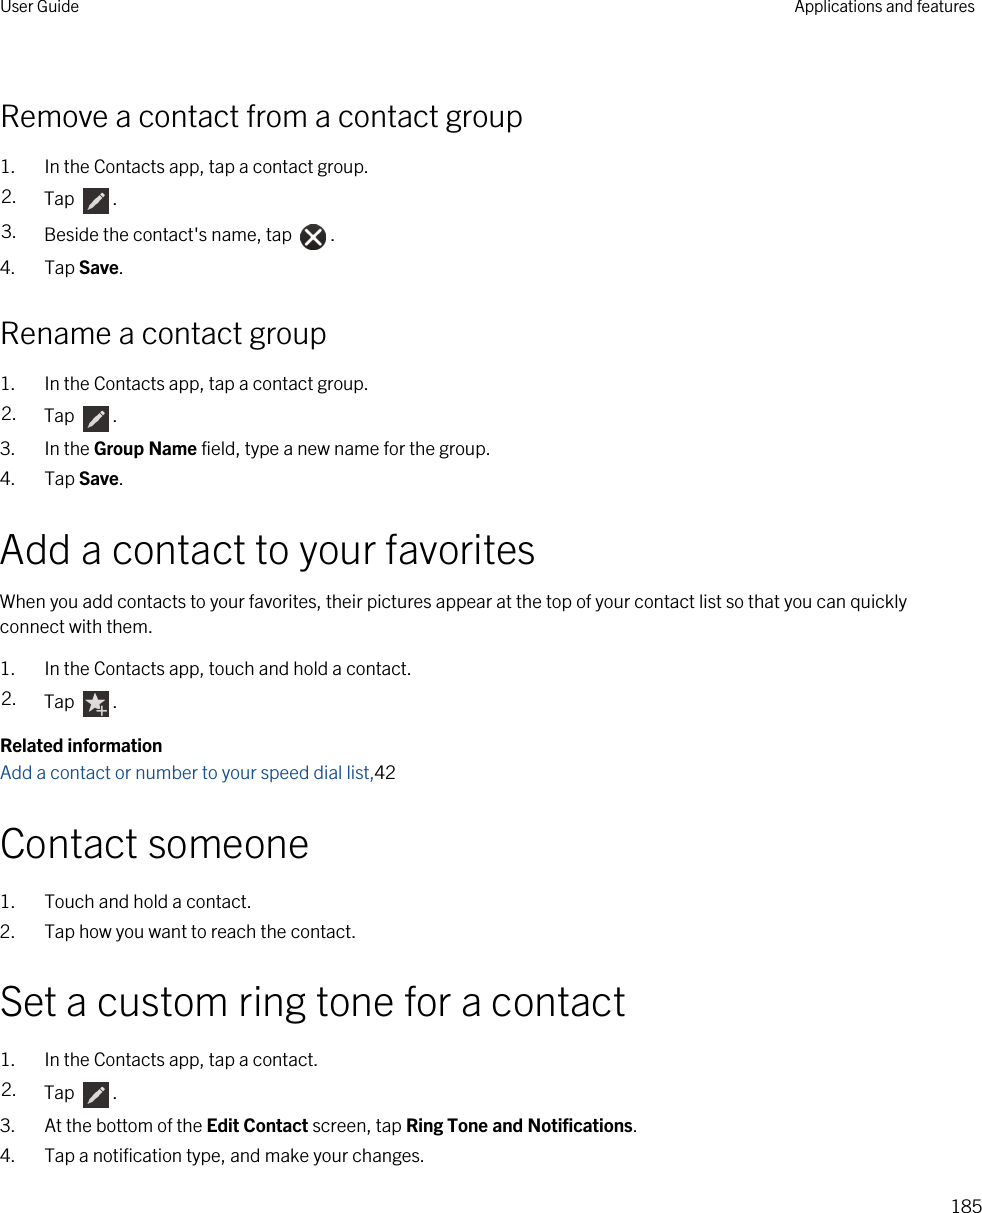 Remove a contact from a contact group1. In the Contacts app, tap a contact group.2. Tap  .3. Beside the contact&apos;s name, tap  .4. Tap Save.Rename a contact group1. In the Contacts app, tap a contact group.2. Tap  .3. In the Group Name field, type a new name for the group.4. Tap Save.Add a contact to your favoritesWhen you add contacts to your favorites, their pictures appear at the top of your contact list so that you can quickly connect with them.1. In the Contacts app, touch and hold a contact.2. Tap  .Related informationAdd a contact or number to your speed dial list,42Contact someone1. Touch and hold a contact.2. Tap how you want to reach the contact.Set a custom ring tone for a contact1. In the Contacts app, tap a contact.2. Tap  .3. At the bottom of the Edit Contact screen, tap Ring Tone and Notifications.4. Tap a notification type, and make your changes.User Guide Applications and features185